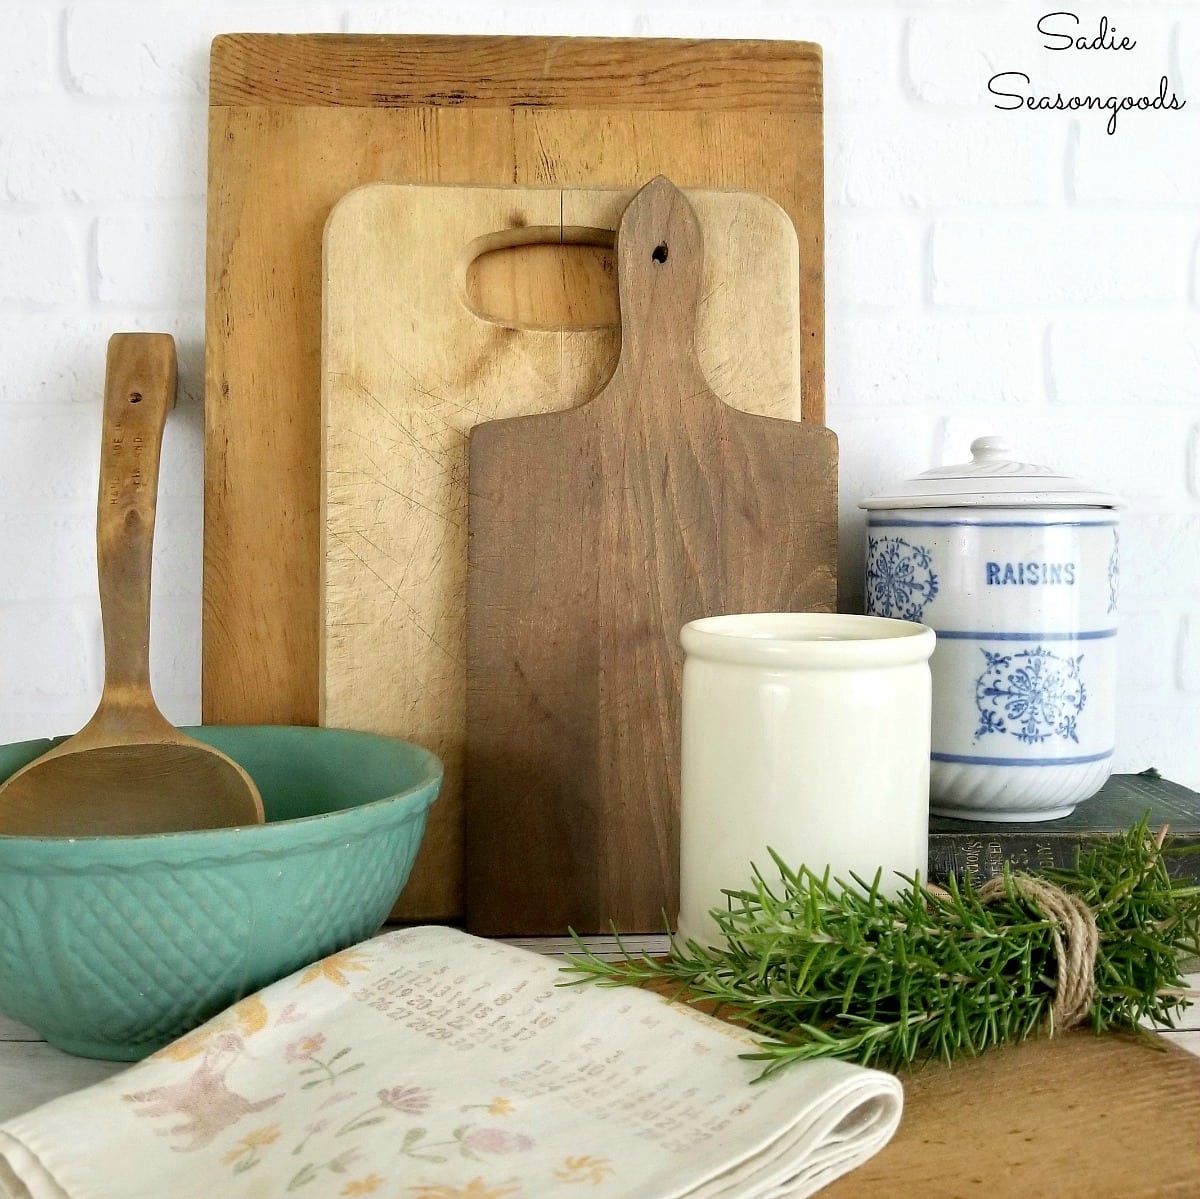 Cheap-farmhouse-decor-from-the-thrift-store-and-upcycling-ideas-for-French-farmhouse-decor-in-the-kitchen-by-Sadie-Seasongoods.jpg